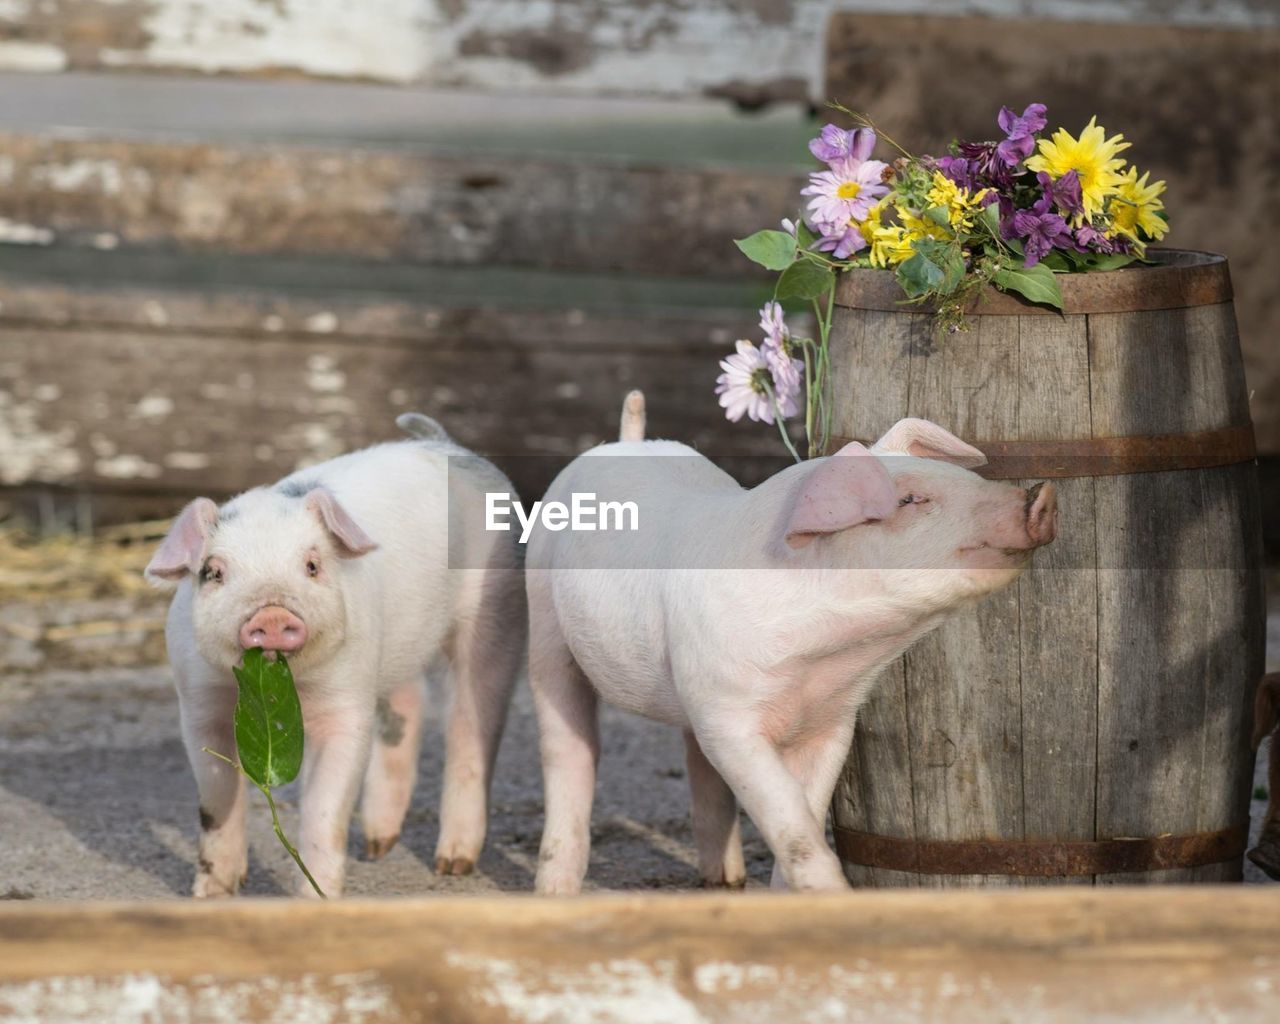 Piglets standing by wooden barrel with flowers